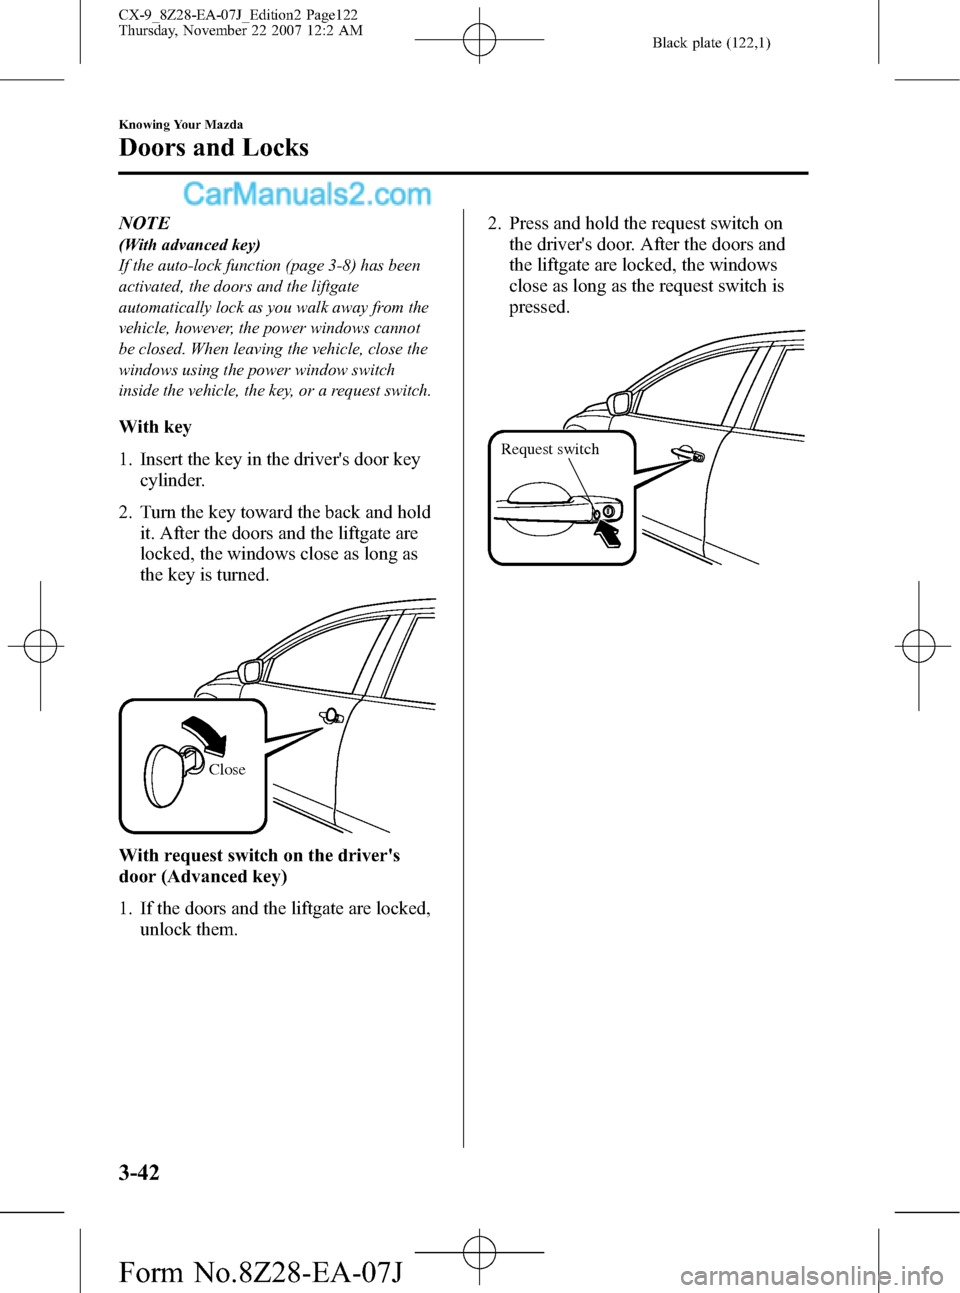 MAZDA MODEL CX-9 2008  Owners Manual (in English) Black plate (122,1)
NOTE
(With advanced key)
If the auto-lock function (page 3-8) has been
activated, the doors and the liftgate
automatically lock as you walk away from the
vehicle, however, the powe